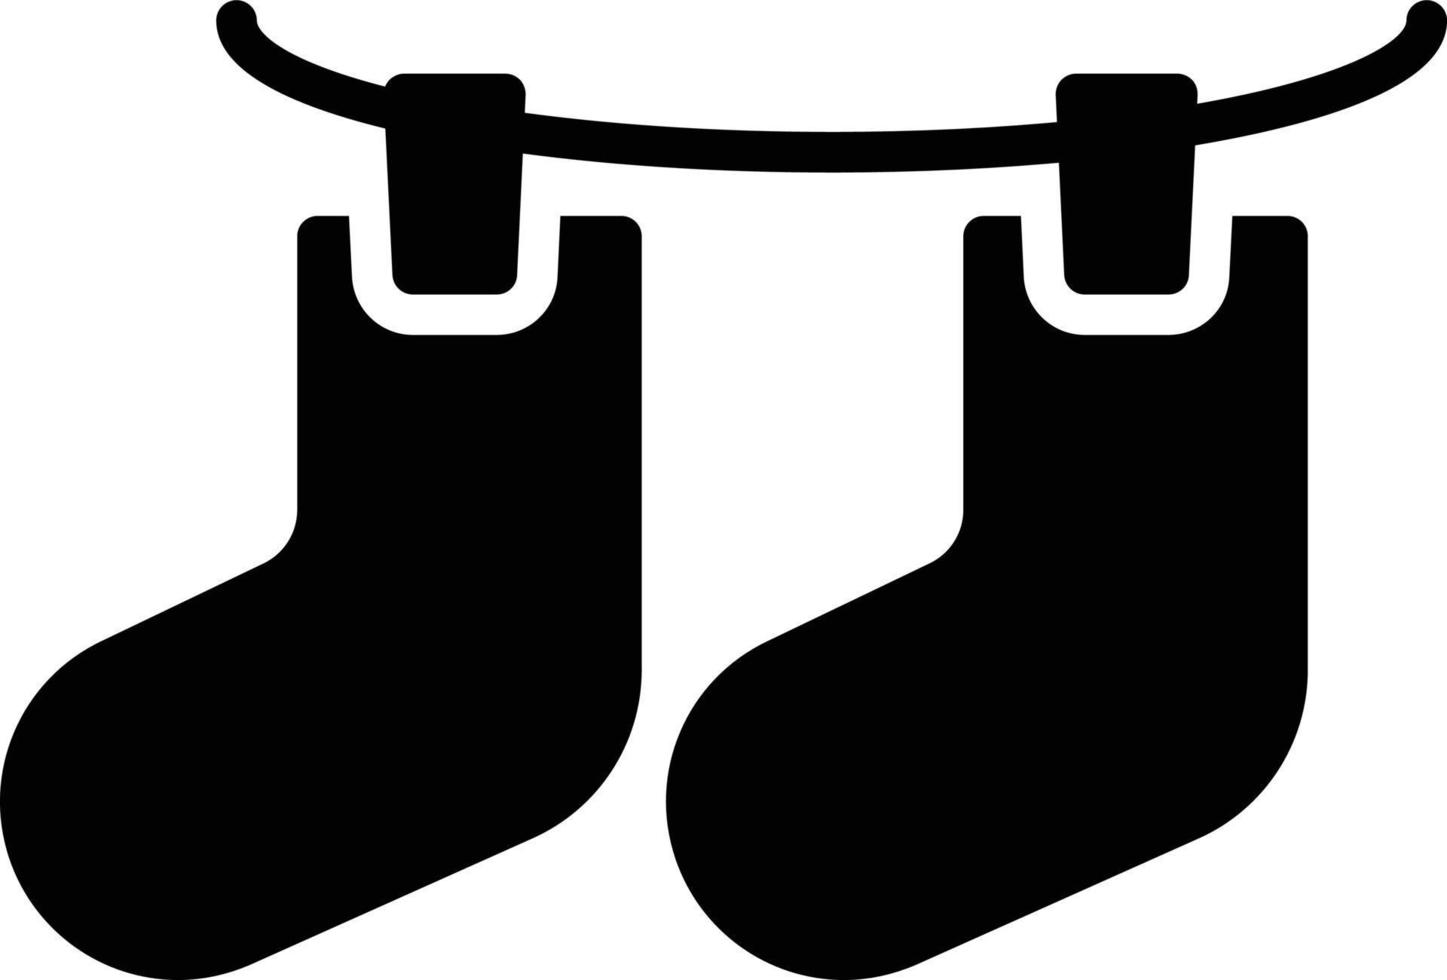 socks vector illustration on a background.Premium quality symbols.vector icons for concept and graphic design.